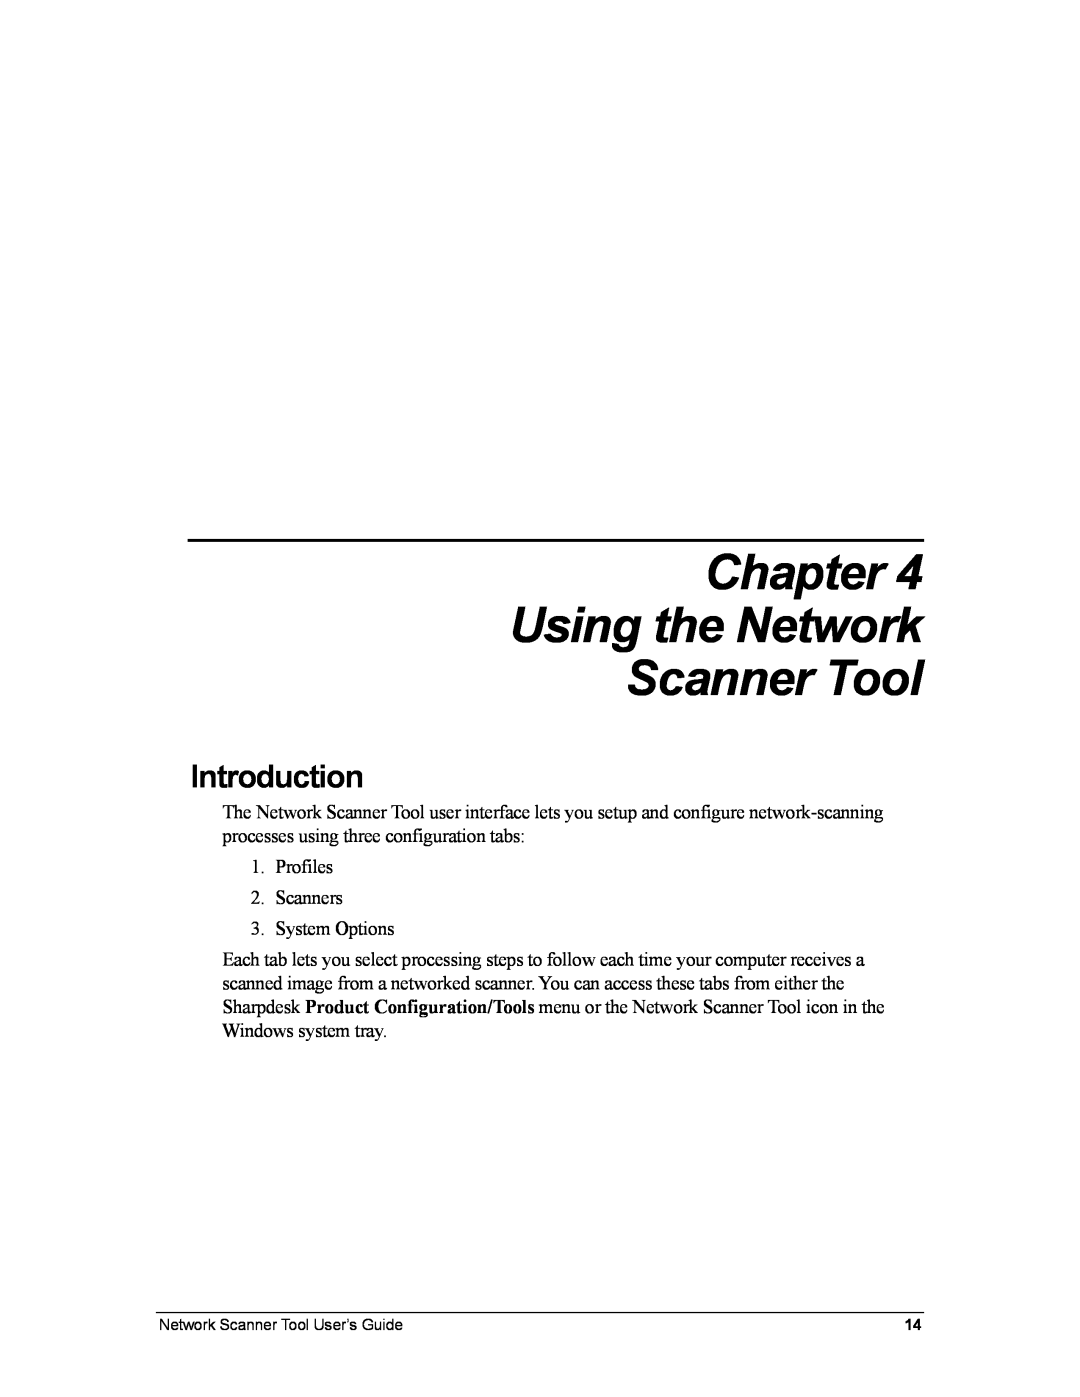 Sharp R3.1 manual Chapter Using the Network Scanner Tool, Introduction 